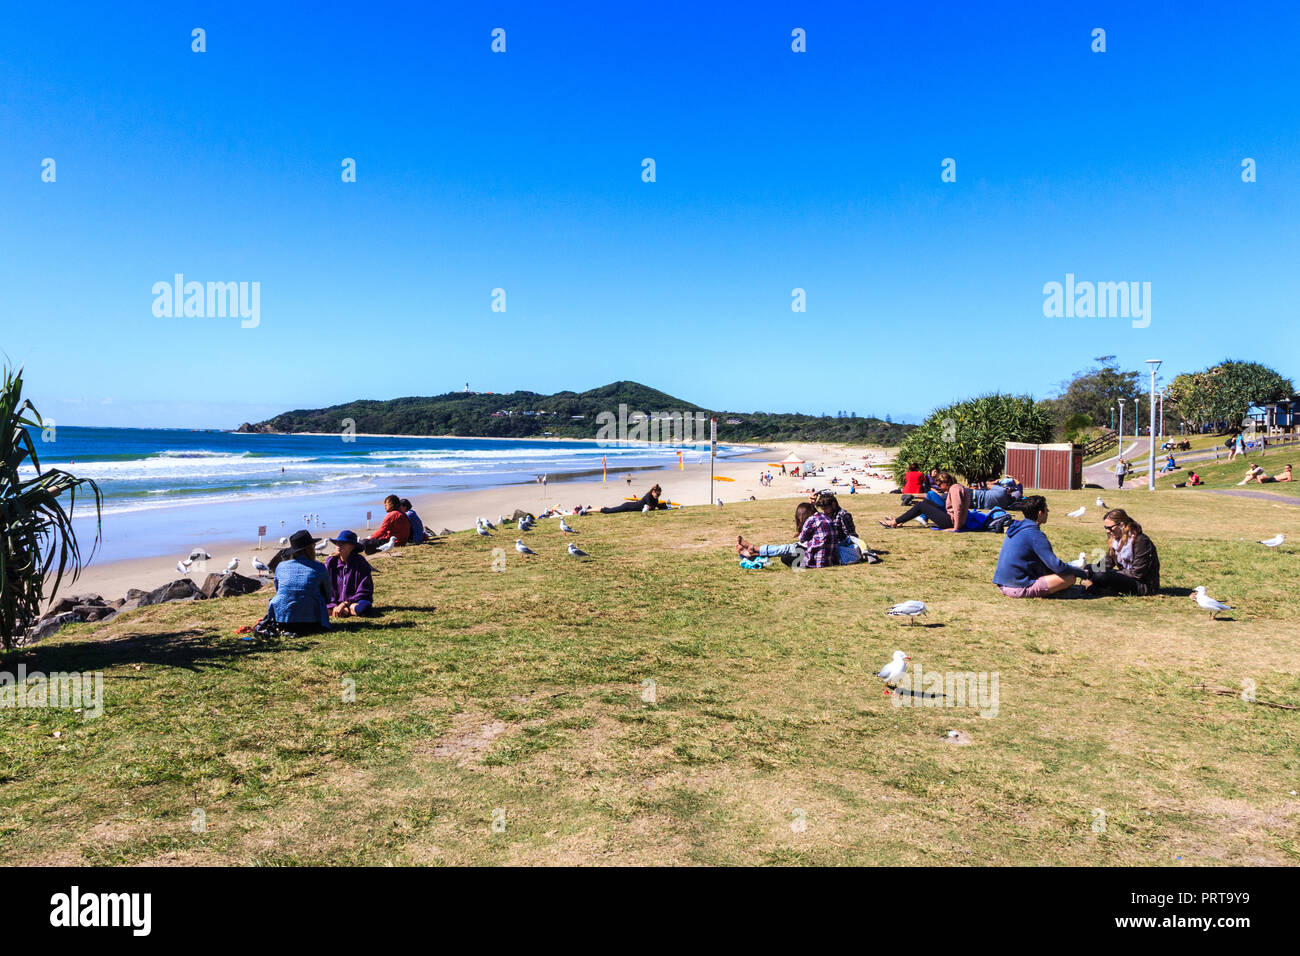 Byron Bay, Australia - 14th May 2015: People sitting on grass at the beach. The area is popular with young people. Stock Photo